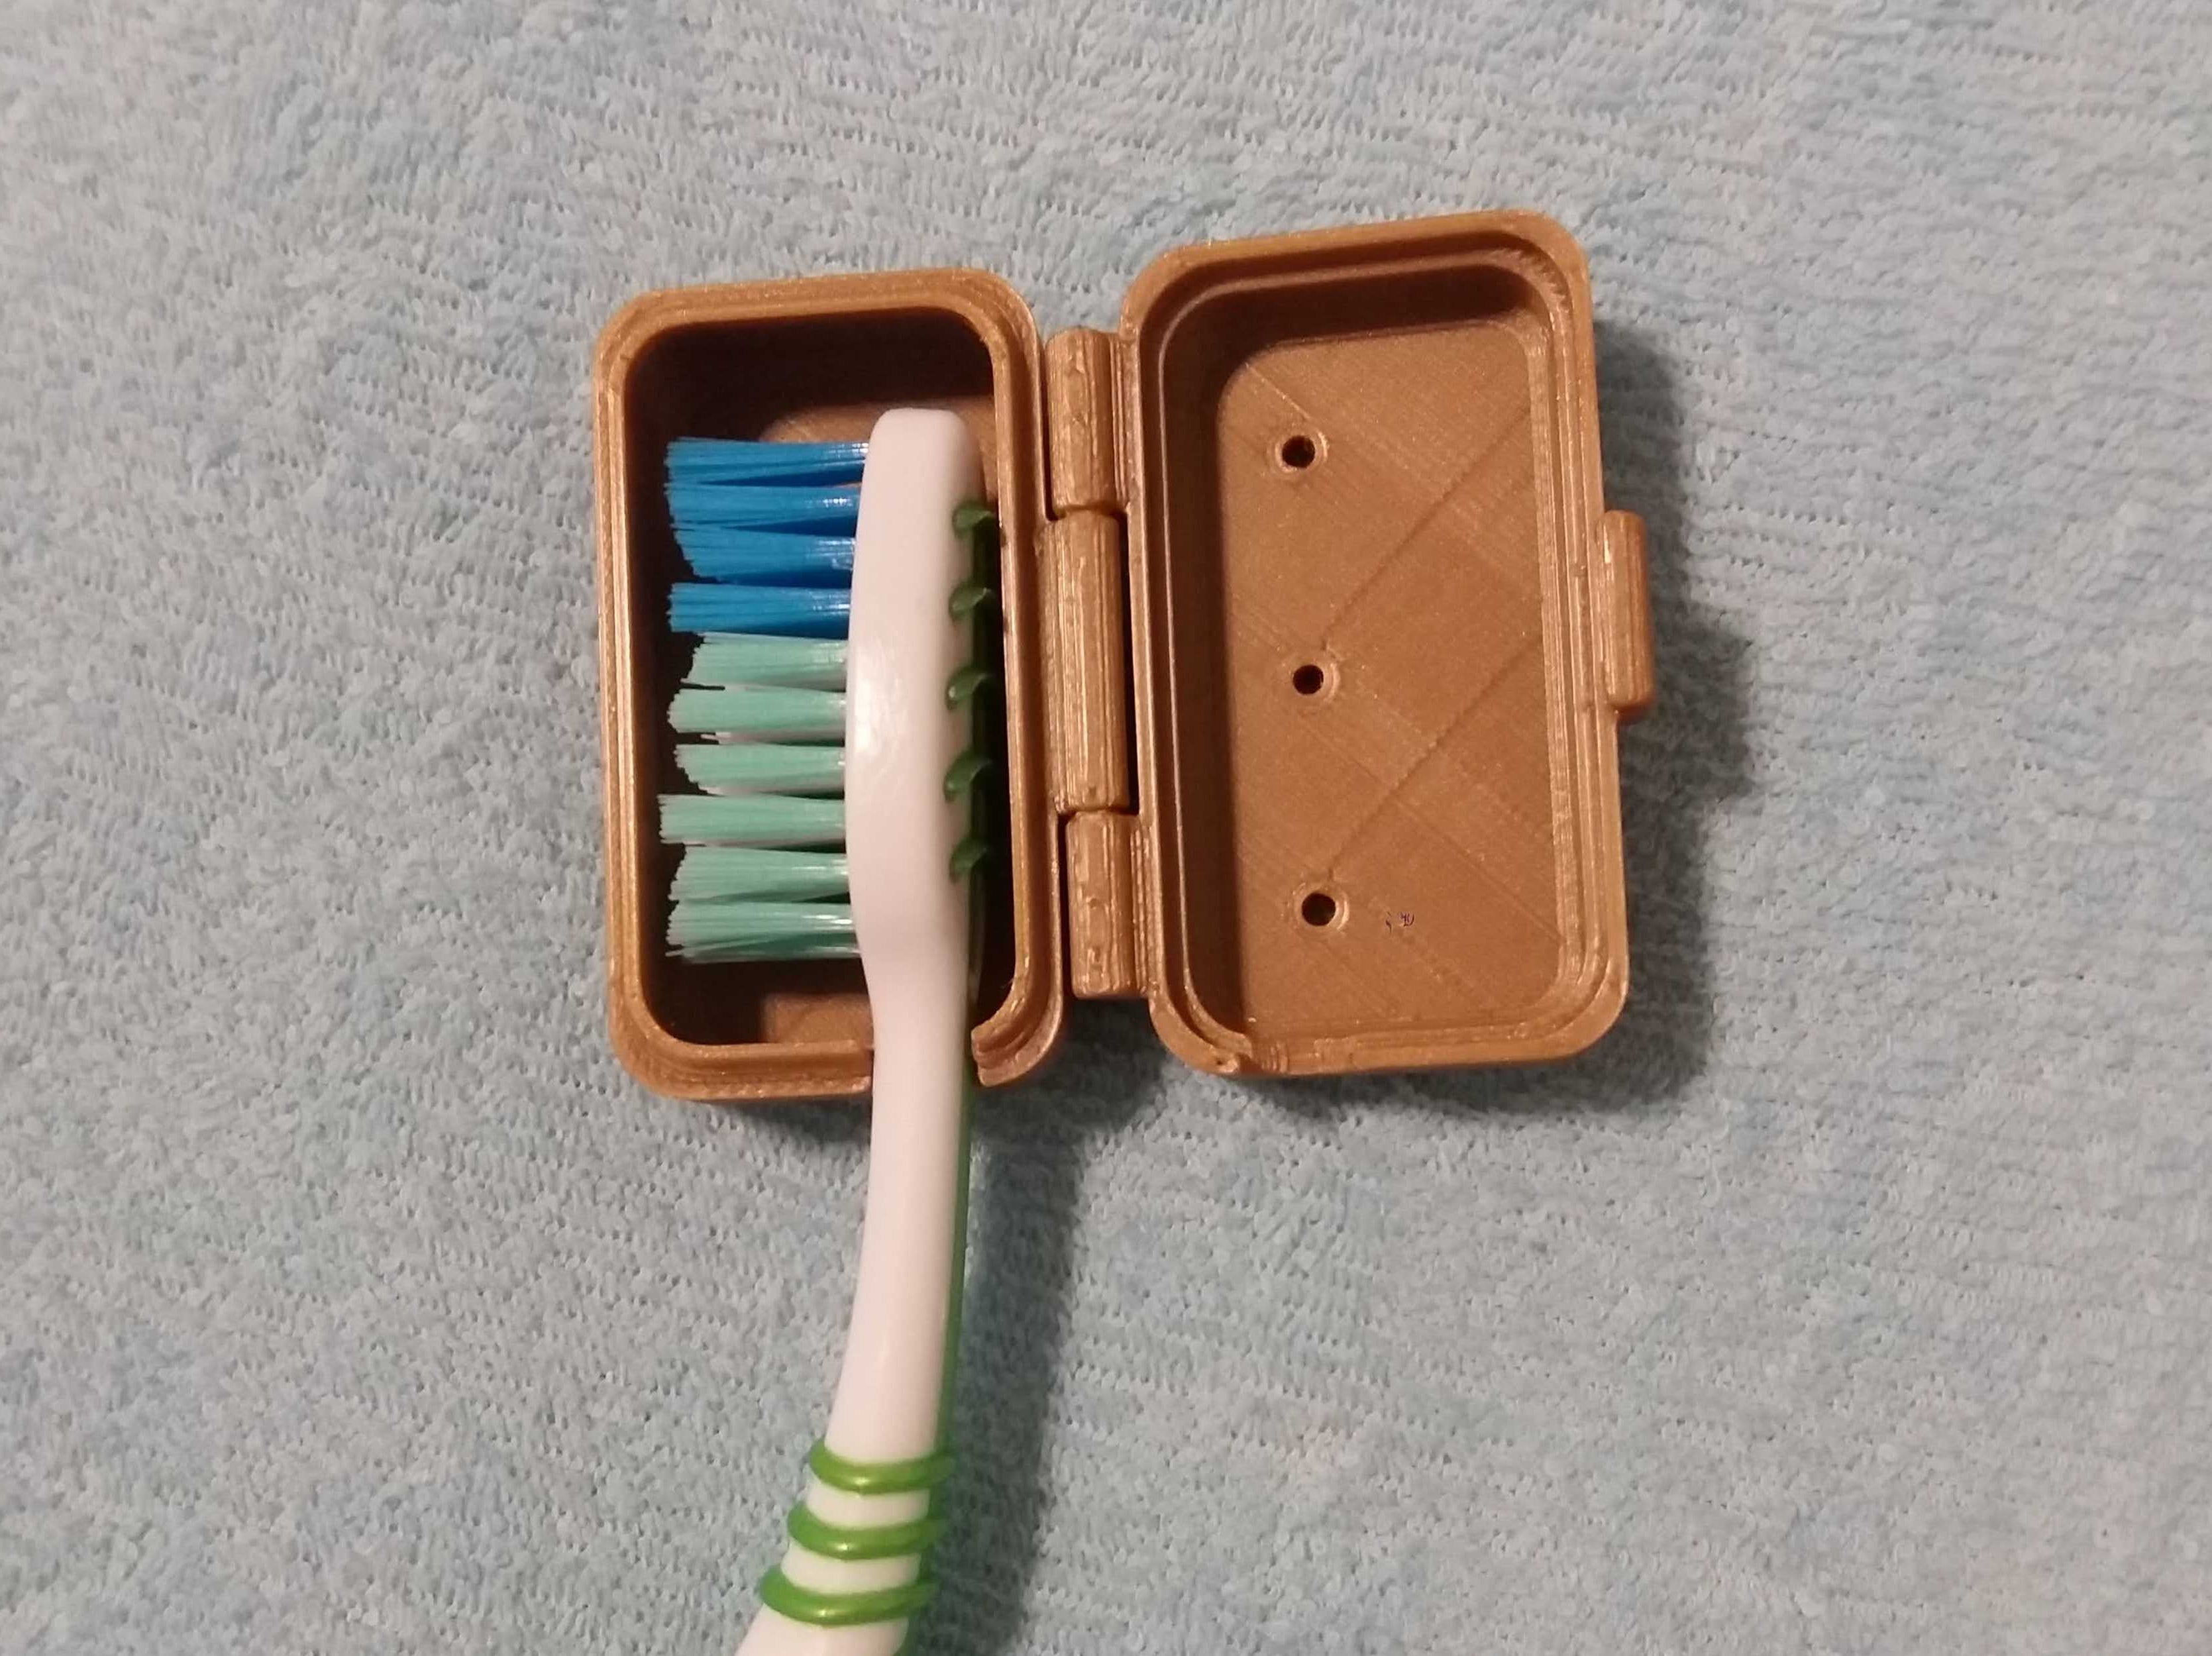 Smaller Toothbrush Case for Travel and Storage